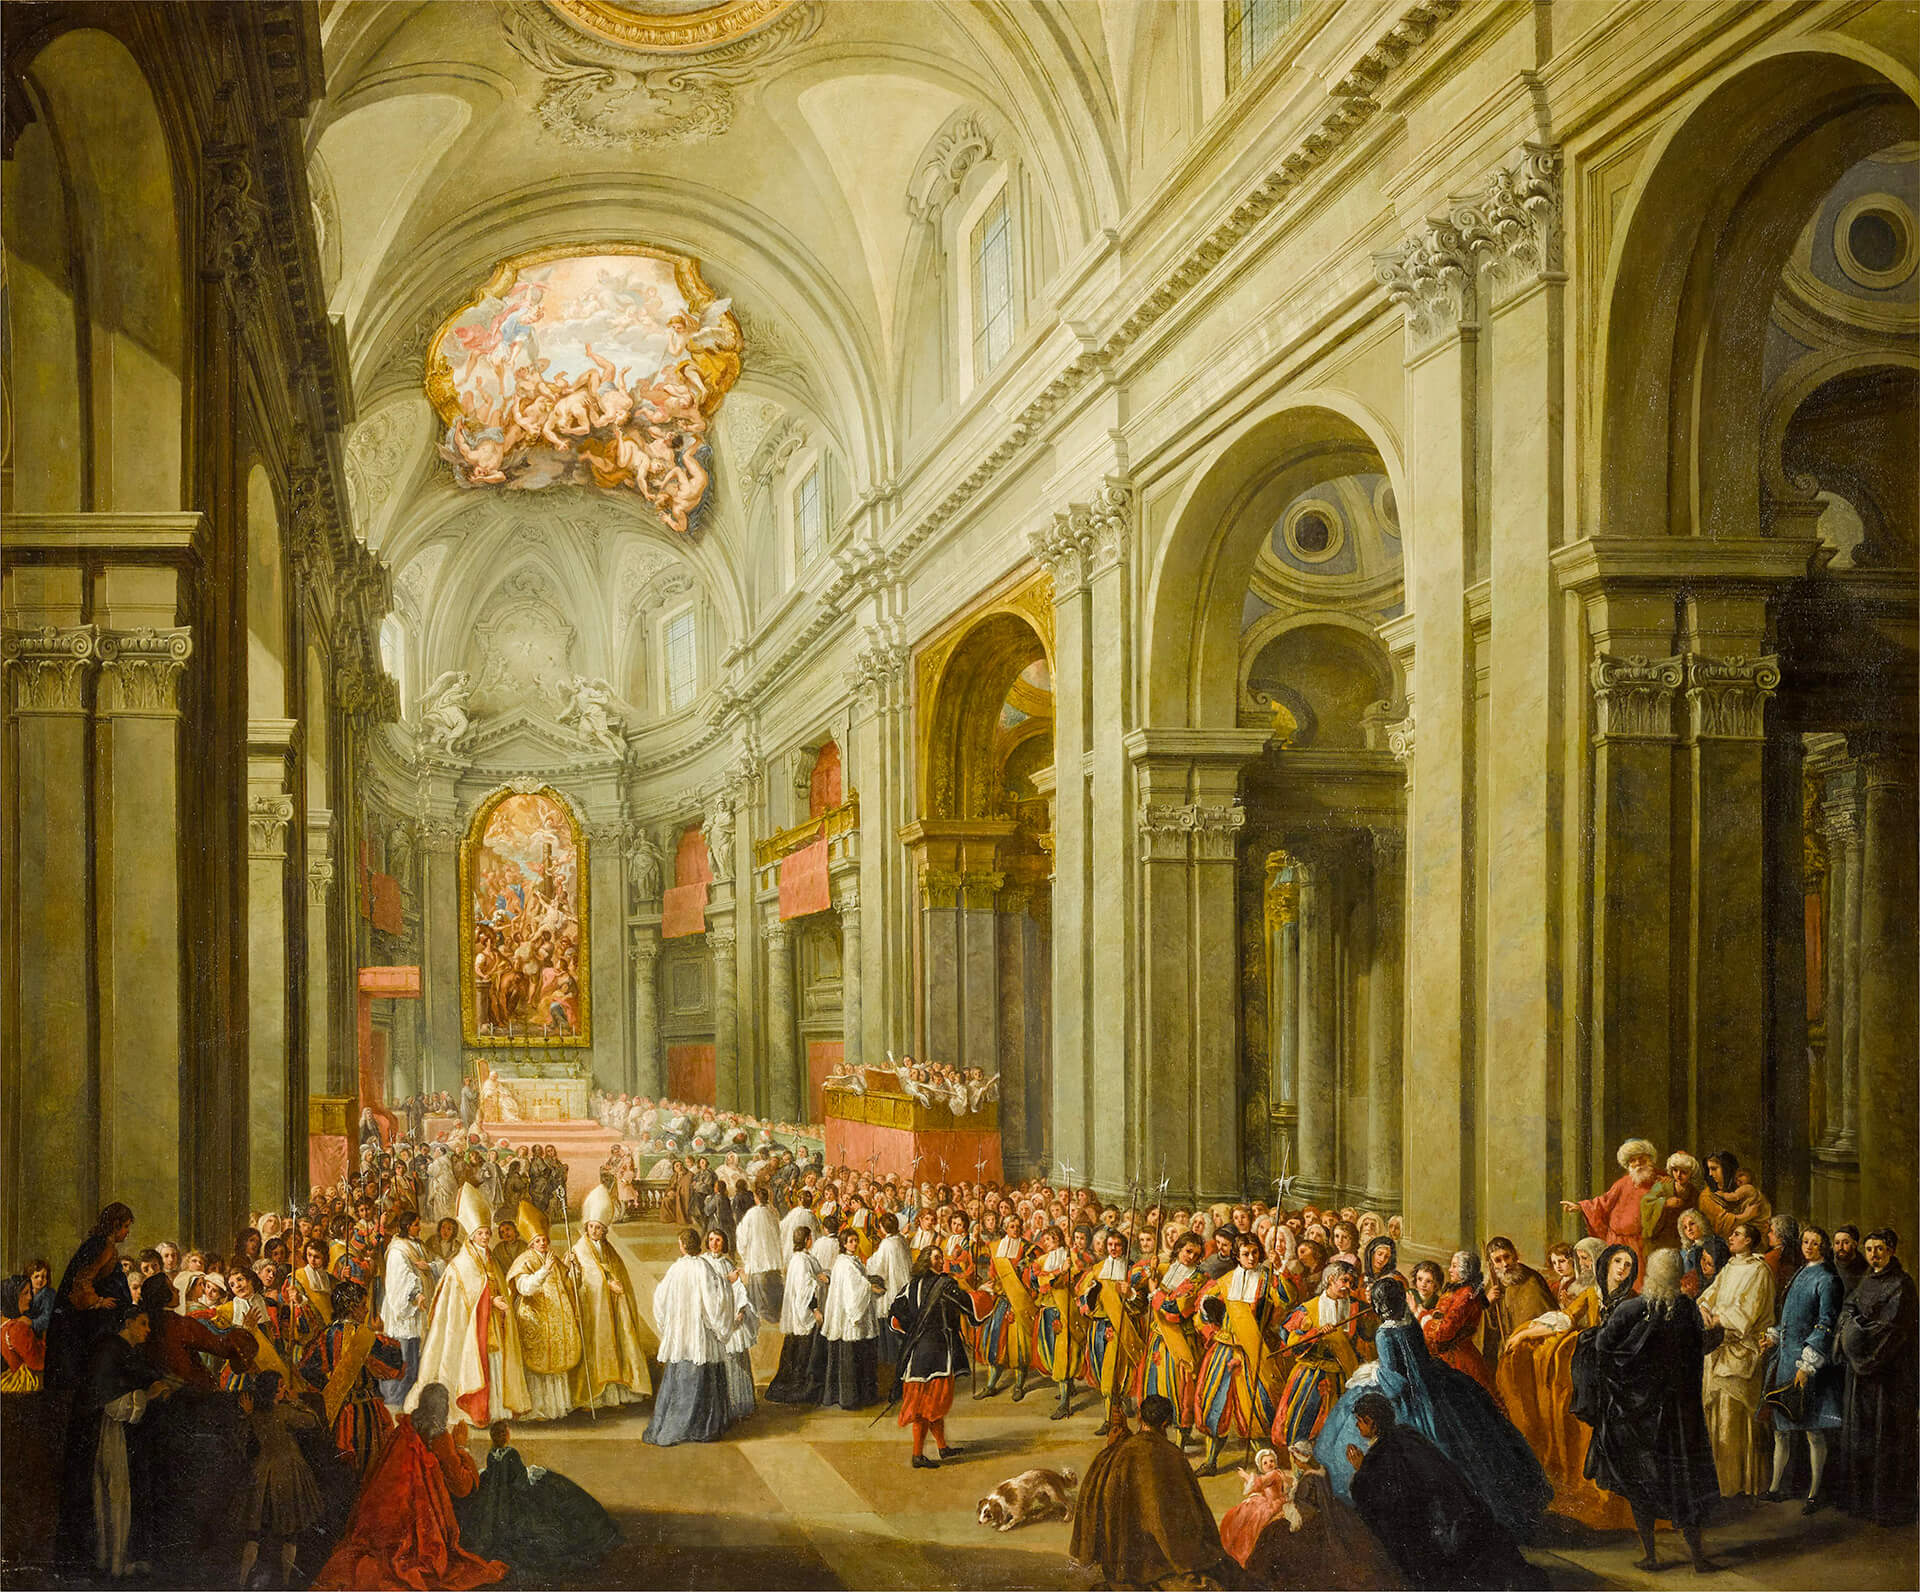 The consacration of Cardinal Rezzonico in the church of SS. Apostoli, Rome, 19 March 1743